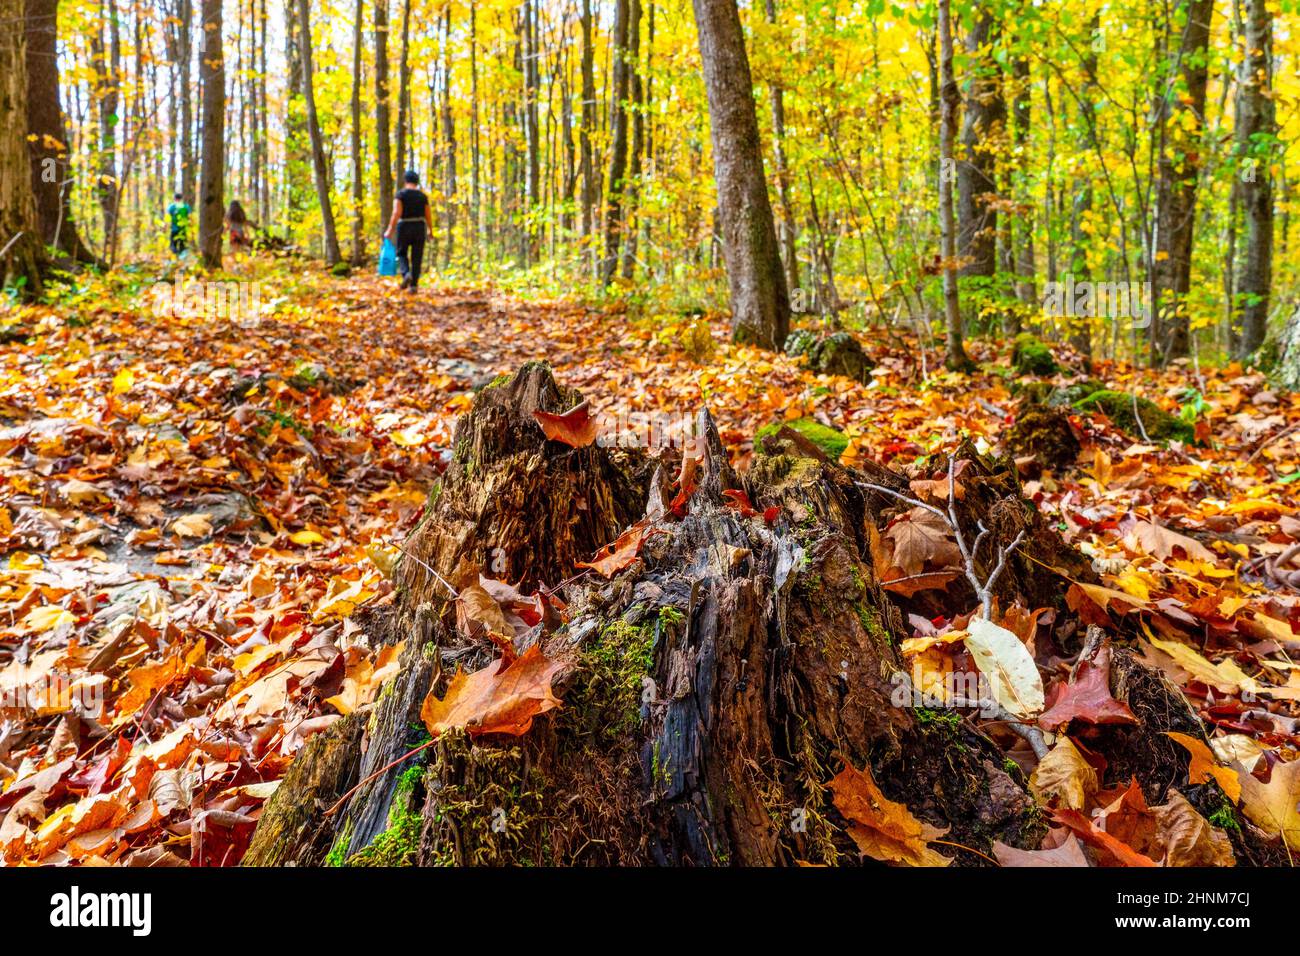 Mushroom pickers looking for autumn mushrooms in a deciduous forest Stock Photo